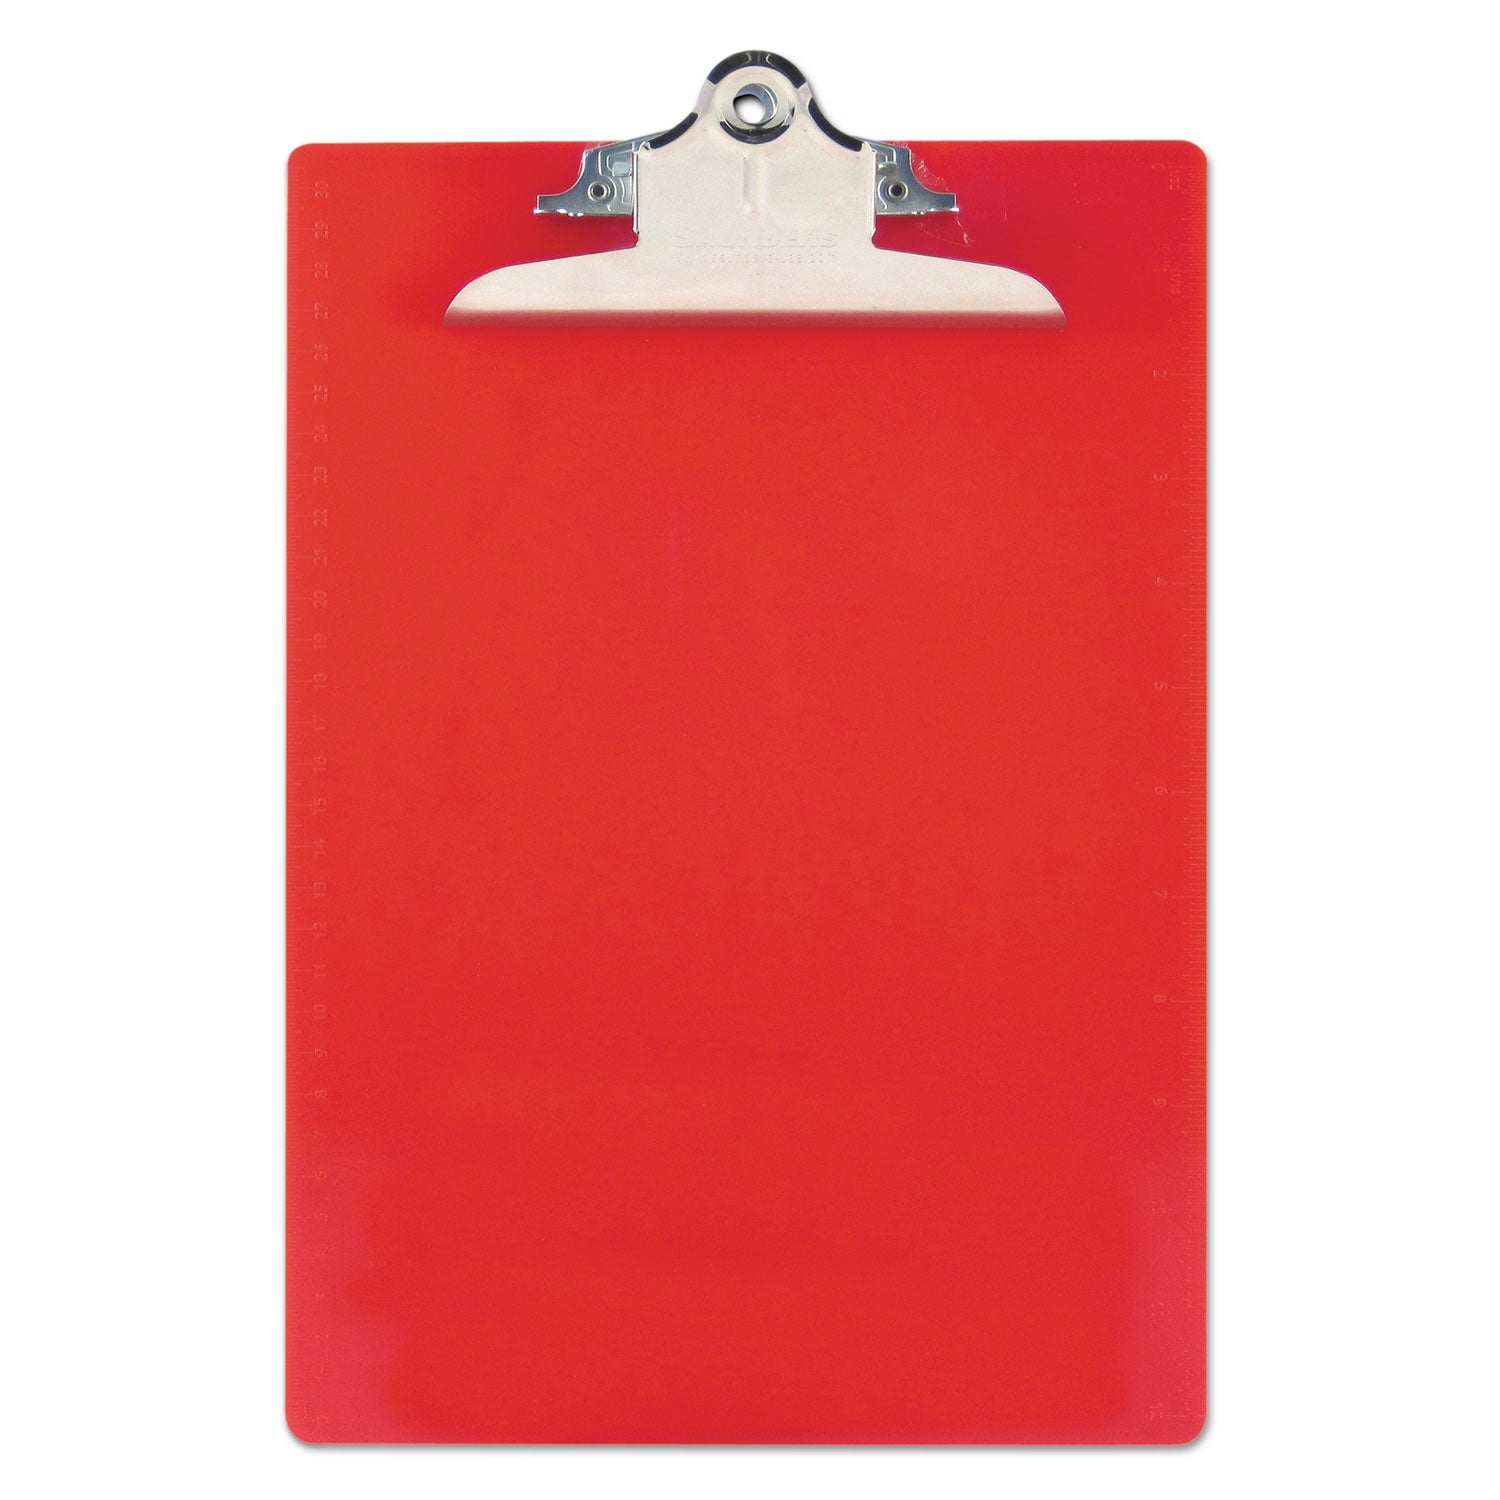 Recycled Plastic Clipboard with Ruler Edge, 1" Clip Capacity, Holds 8.5 x 11 Sheets, Red - 